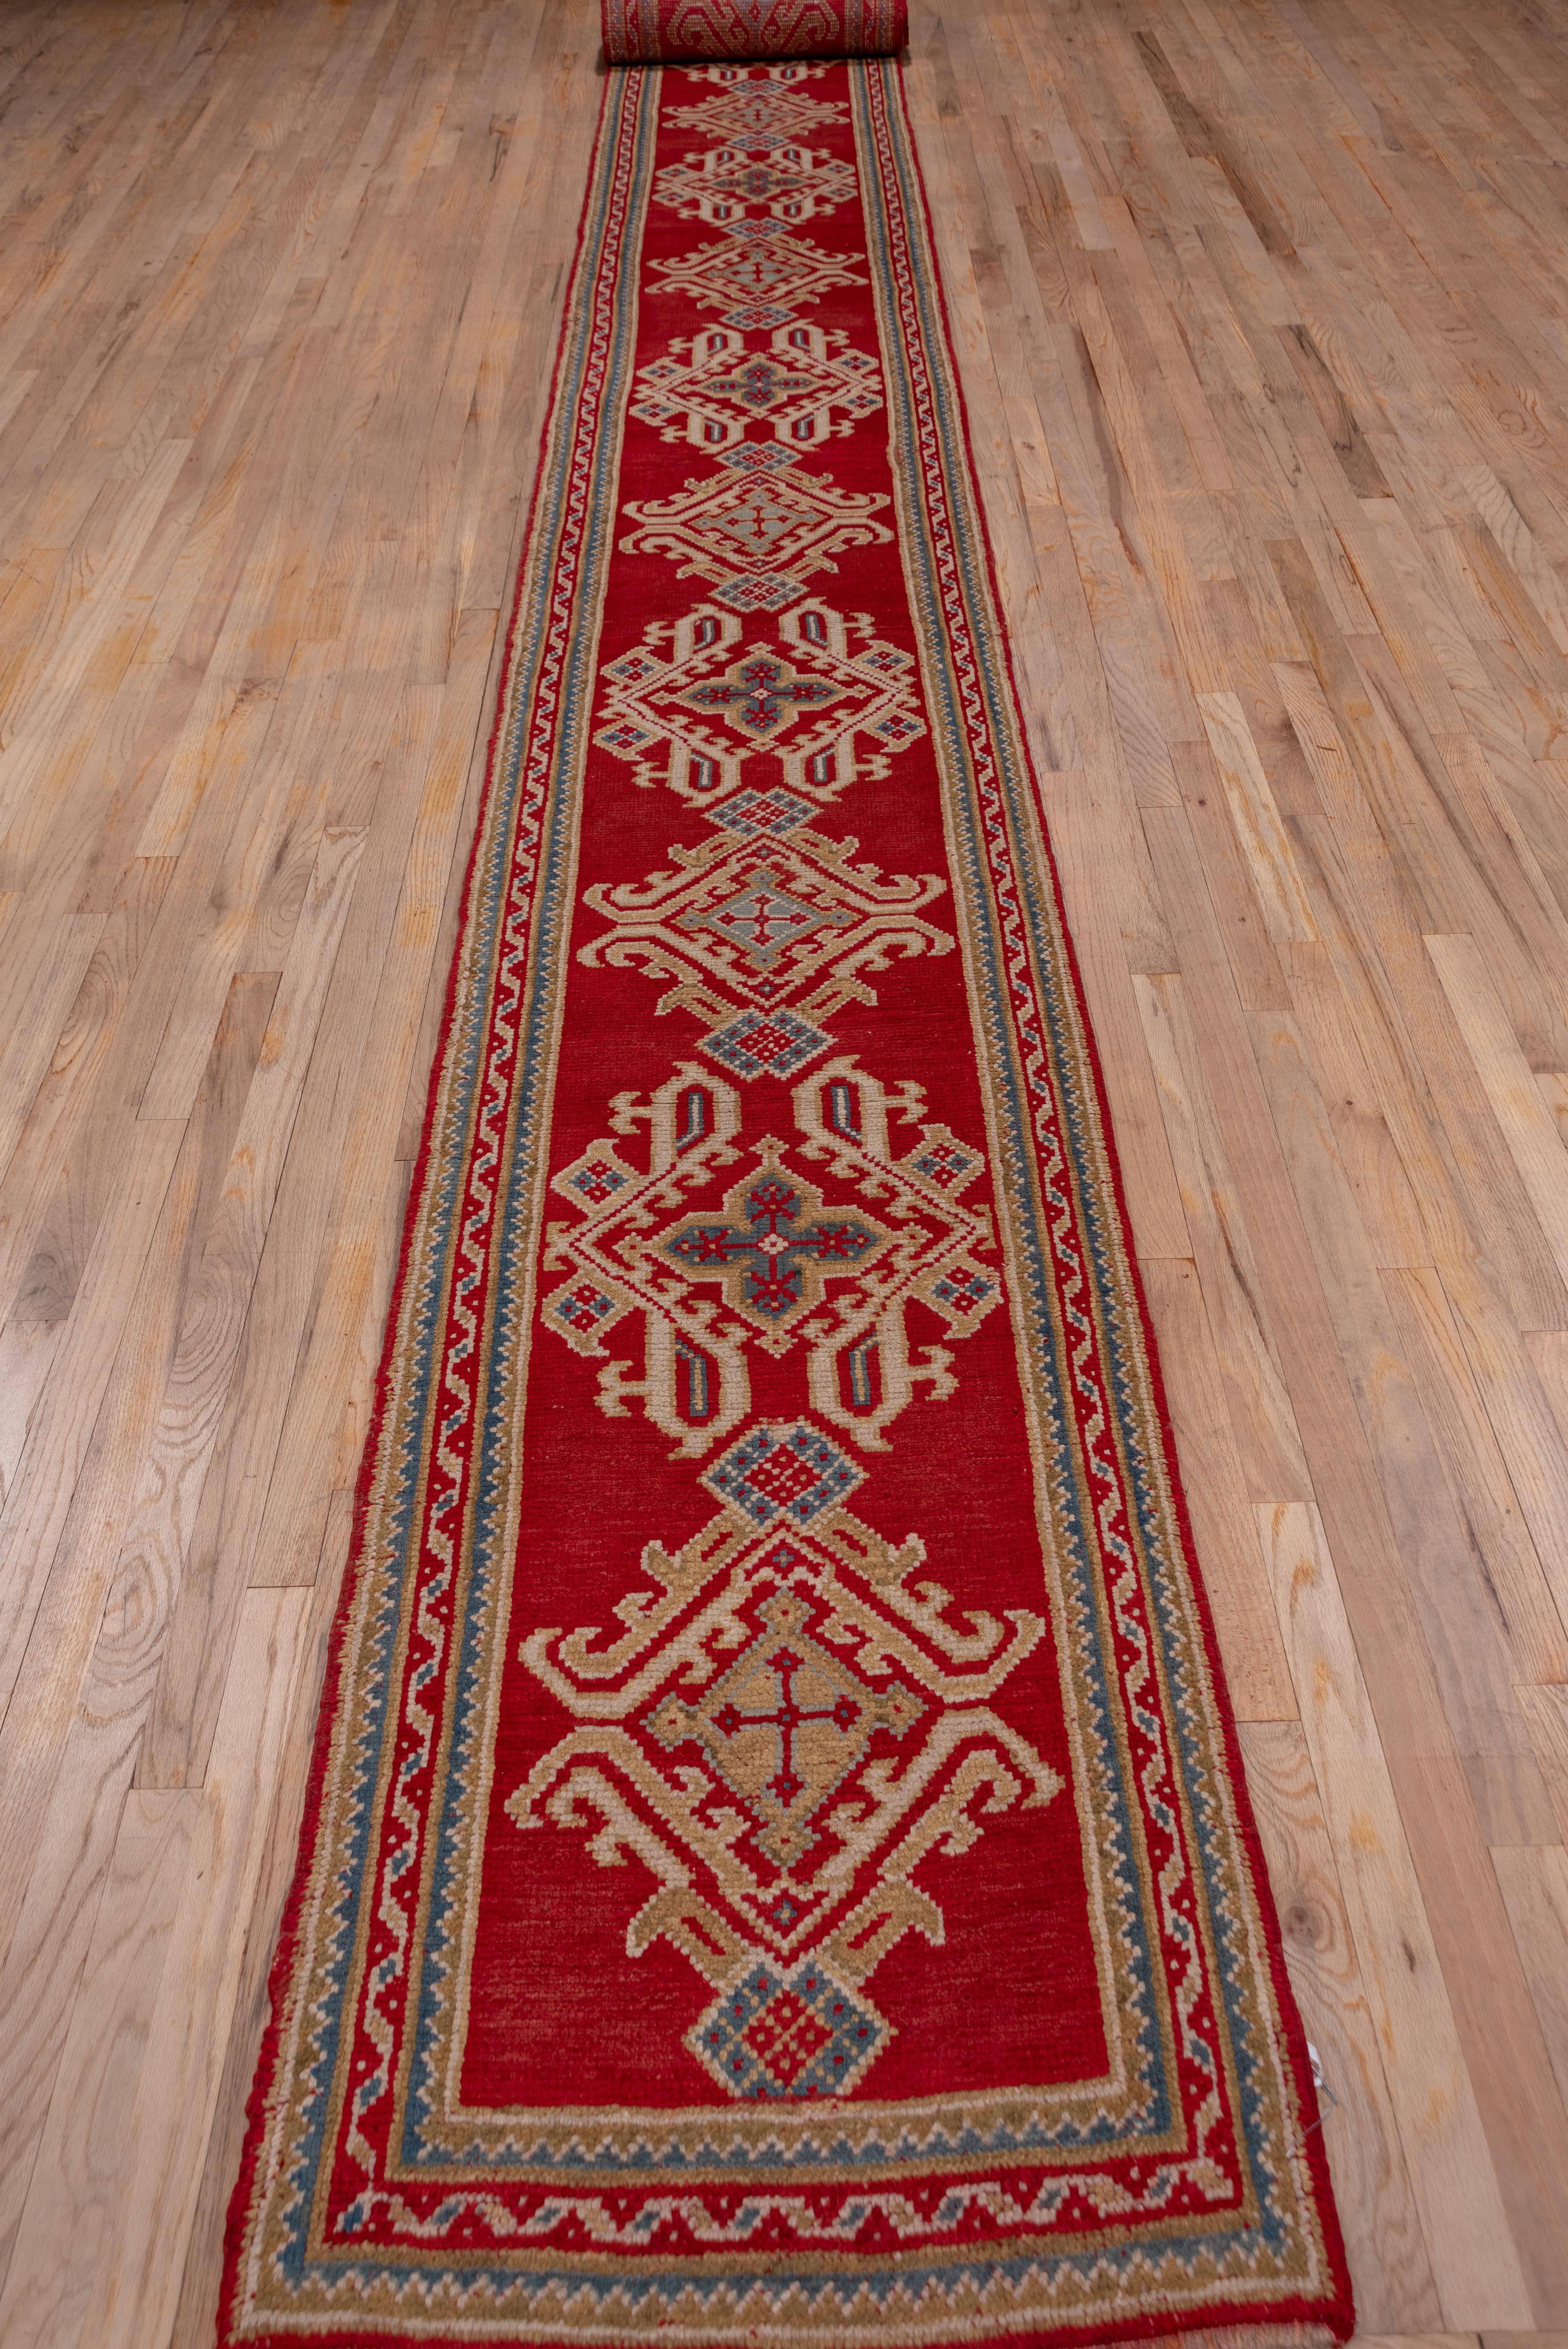 A single column Yaprak (Leaf) design fills the narrow Turkey Red field side to side and is accented in lime, ivory, light blue and rust. The pattern is compressed laterally, but remains uncluttered.